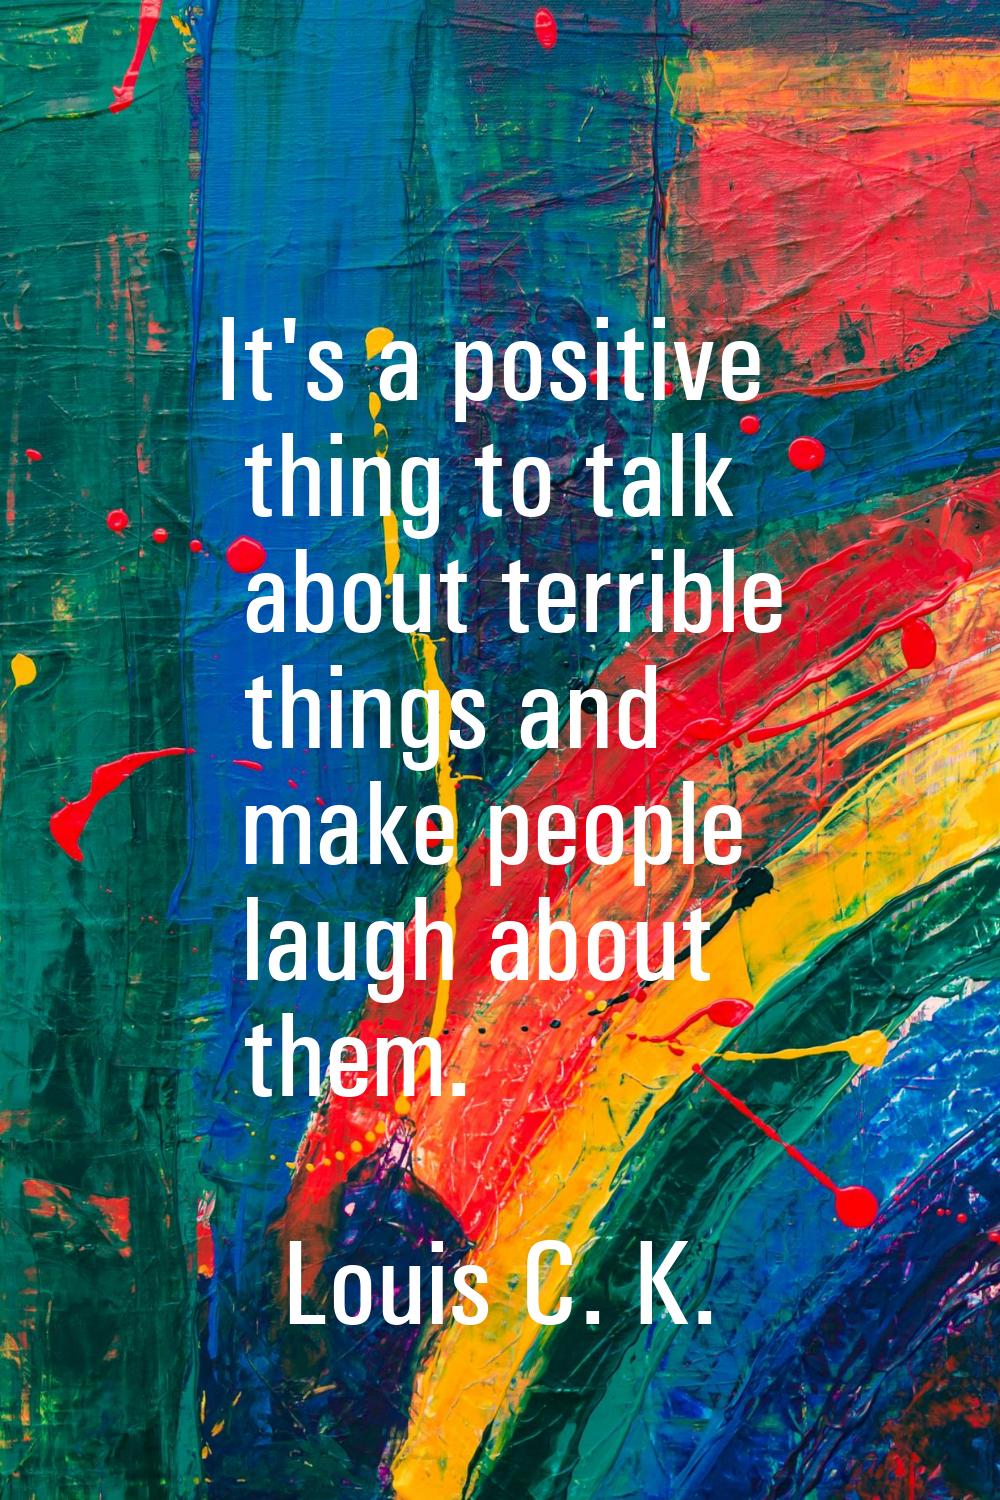 It's a positive thing to talk about terrible things and make people laugh about them.